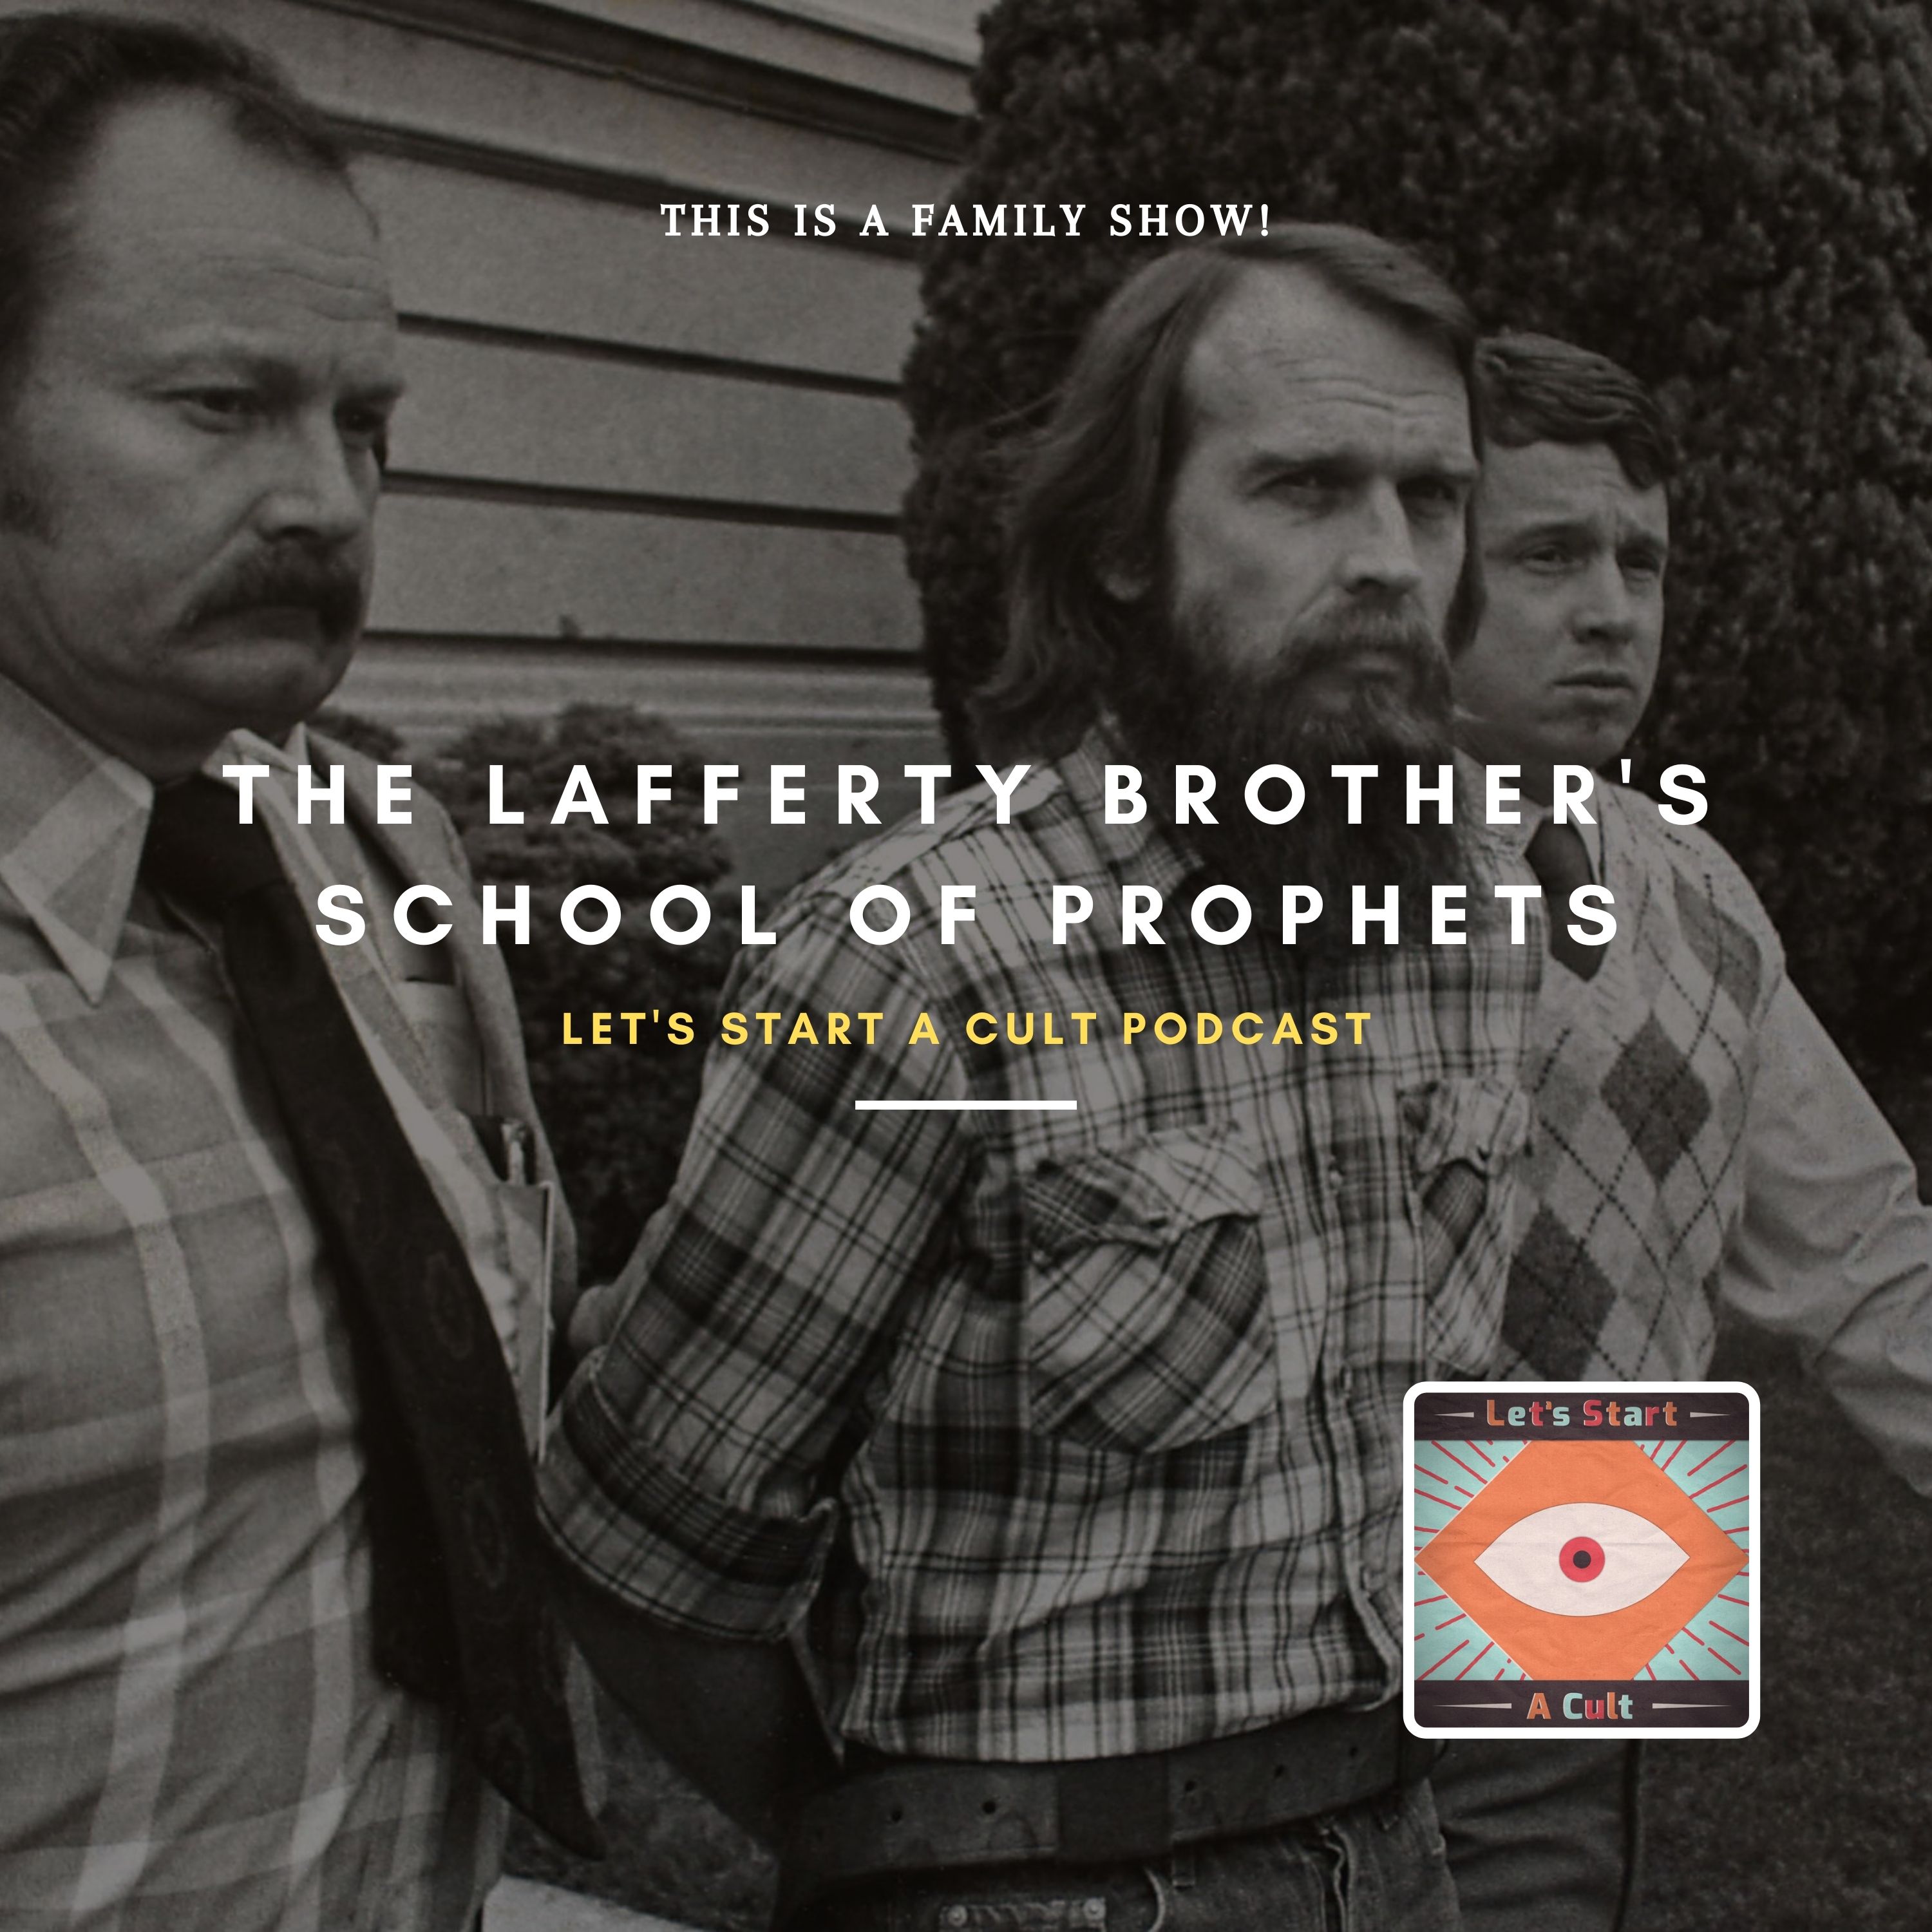 The Lafferty Brothers' School of Prophets | A Family Cult